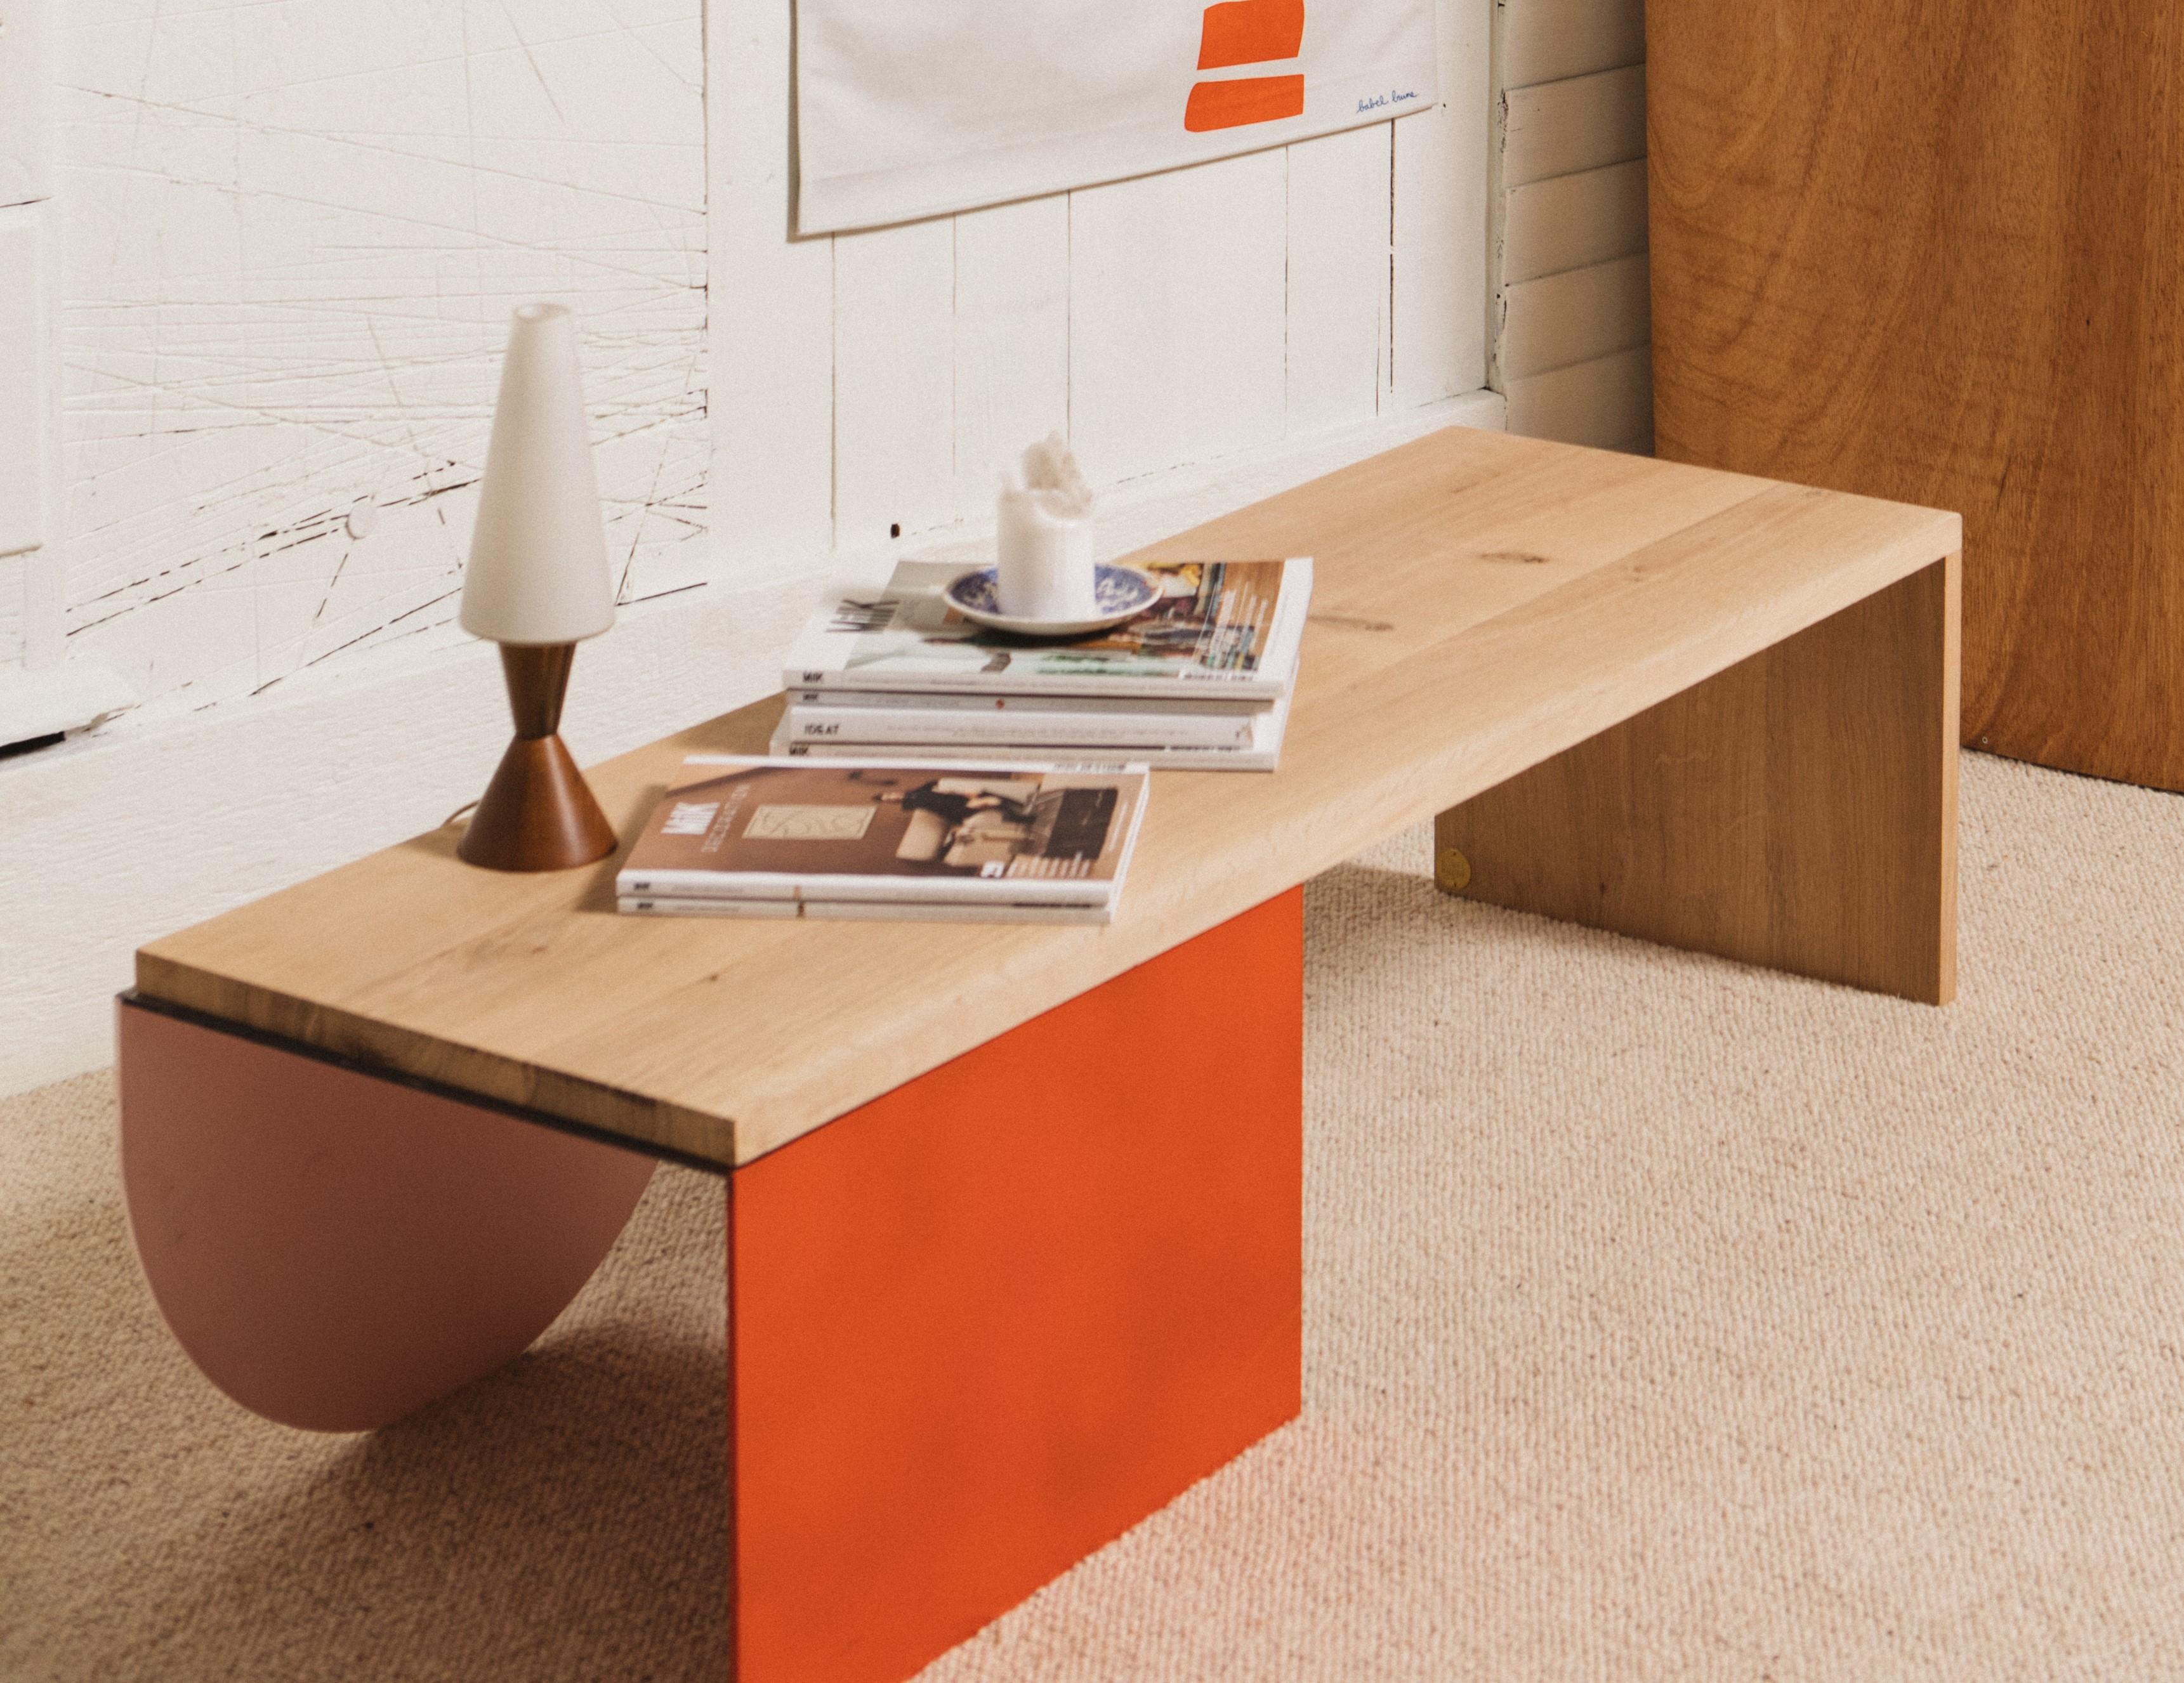 Babylone pink babel one coffee table by Babel Brune
Dimensions: D 42 x W 130 x H 35 cm
Material: Solid blond oak wood, oil finish, pink and red Powder-coated Steel

Little sister, of the Babylone Blue coffee table, this coffee table marries the